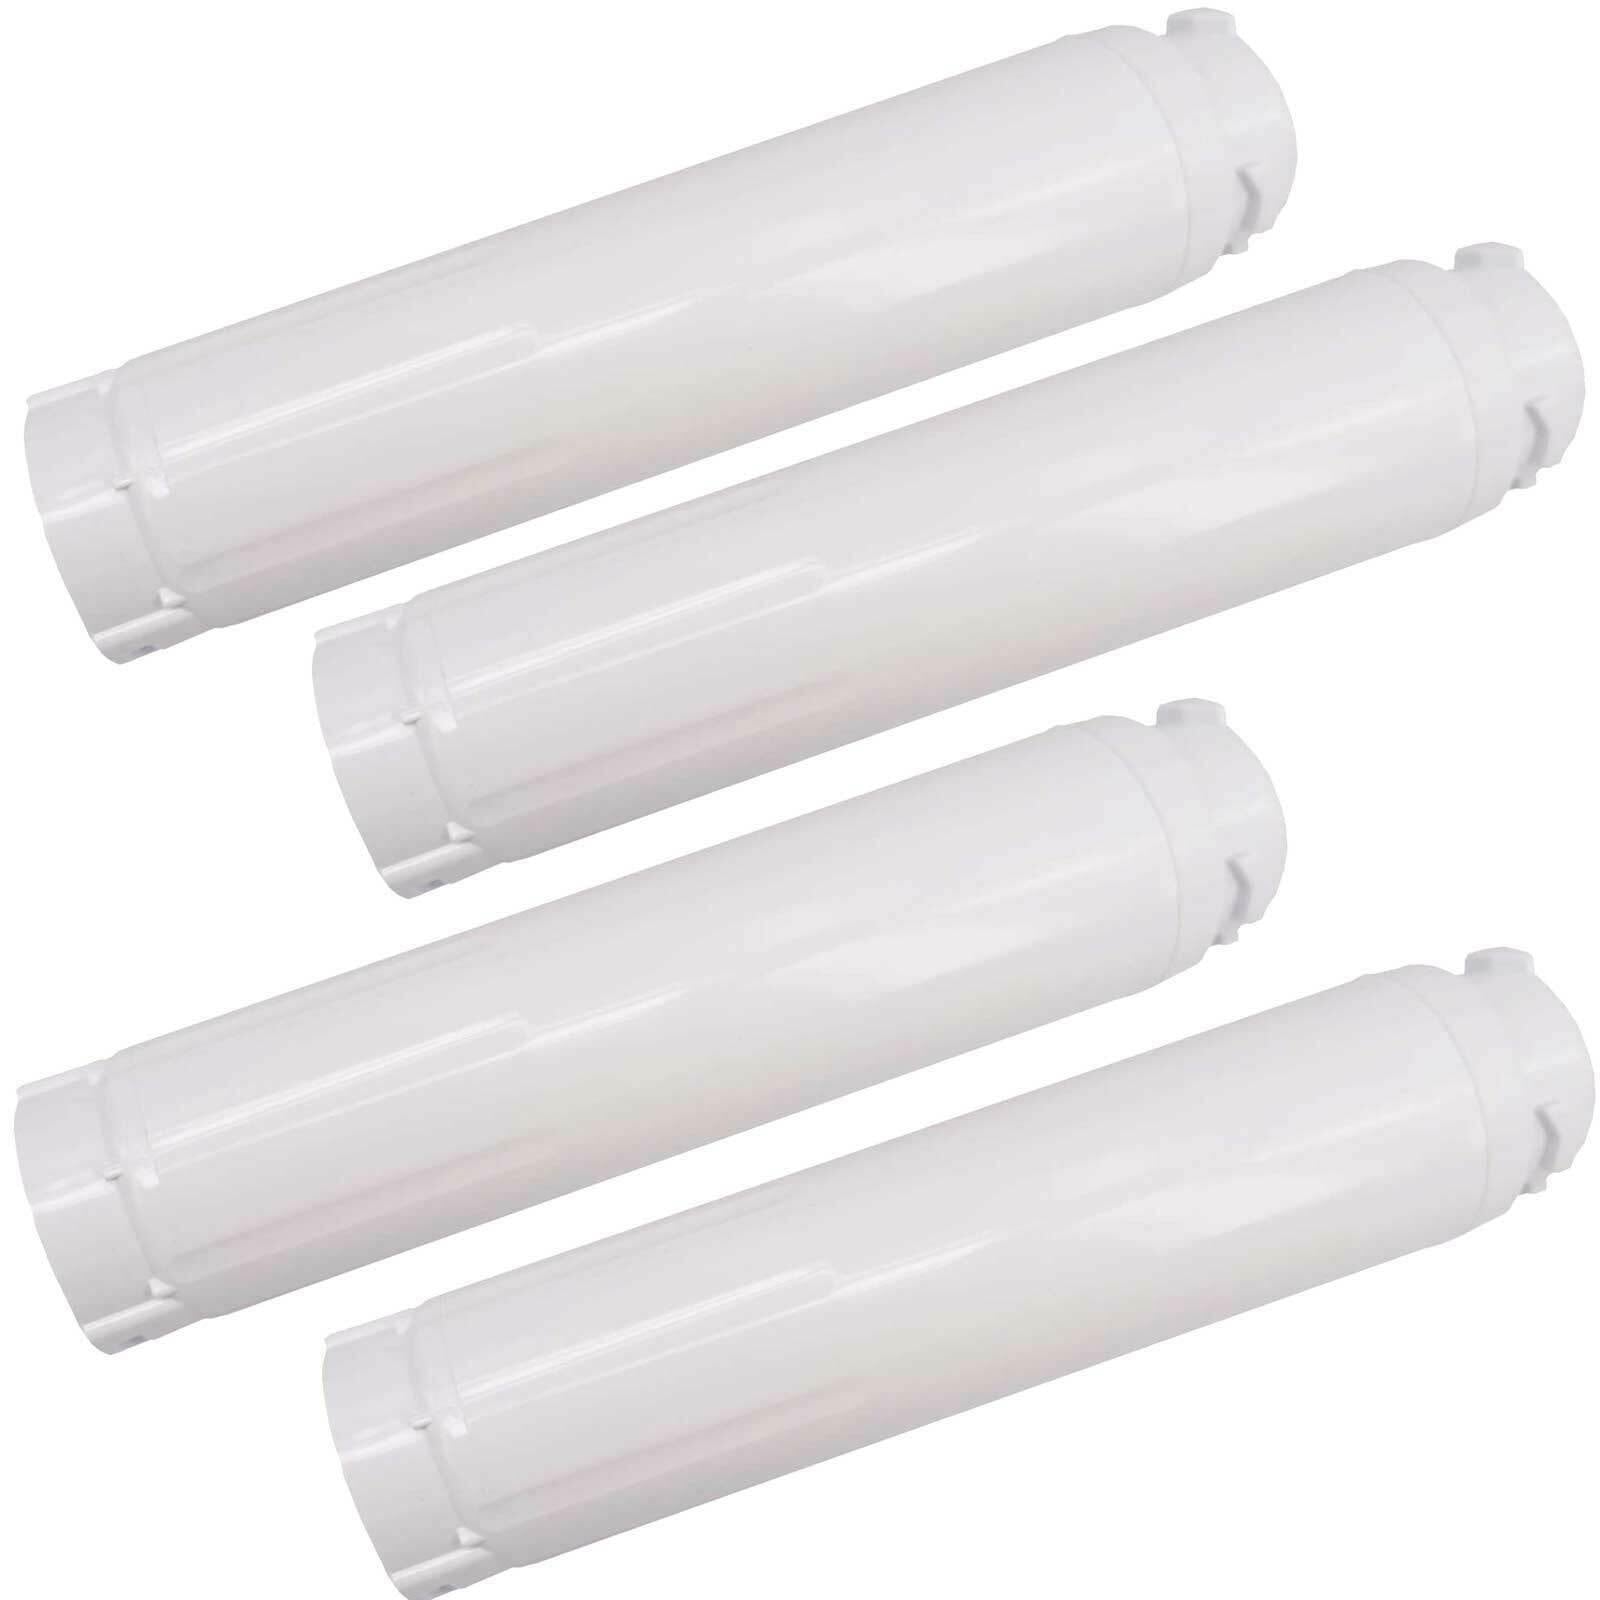 Fridge Water Filter Replacement For Haier RF-2800-15, 10169, 101698B, 101699 Sparesbarn